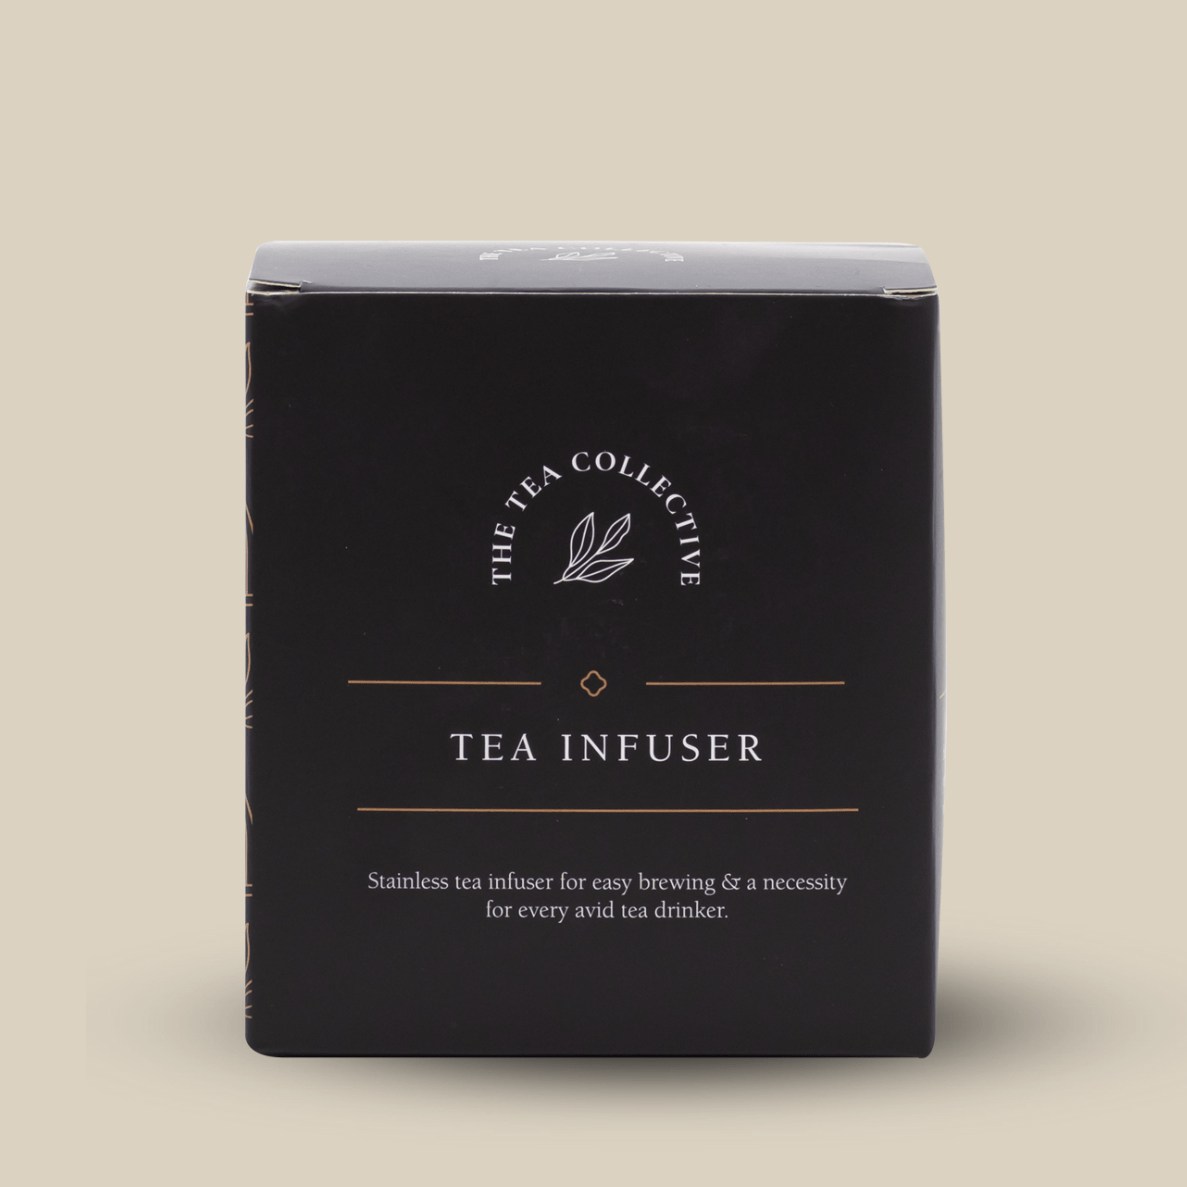 Stainless Tea Infuser Gold by The Tea Collective